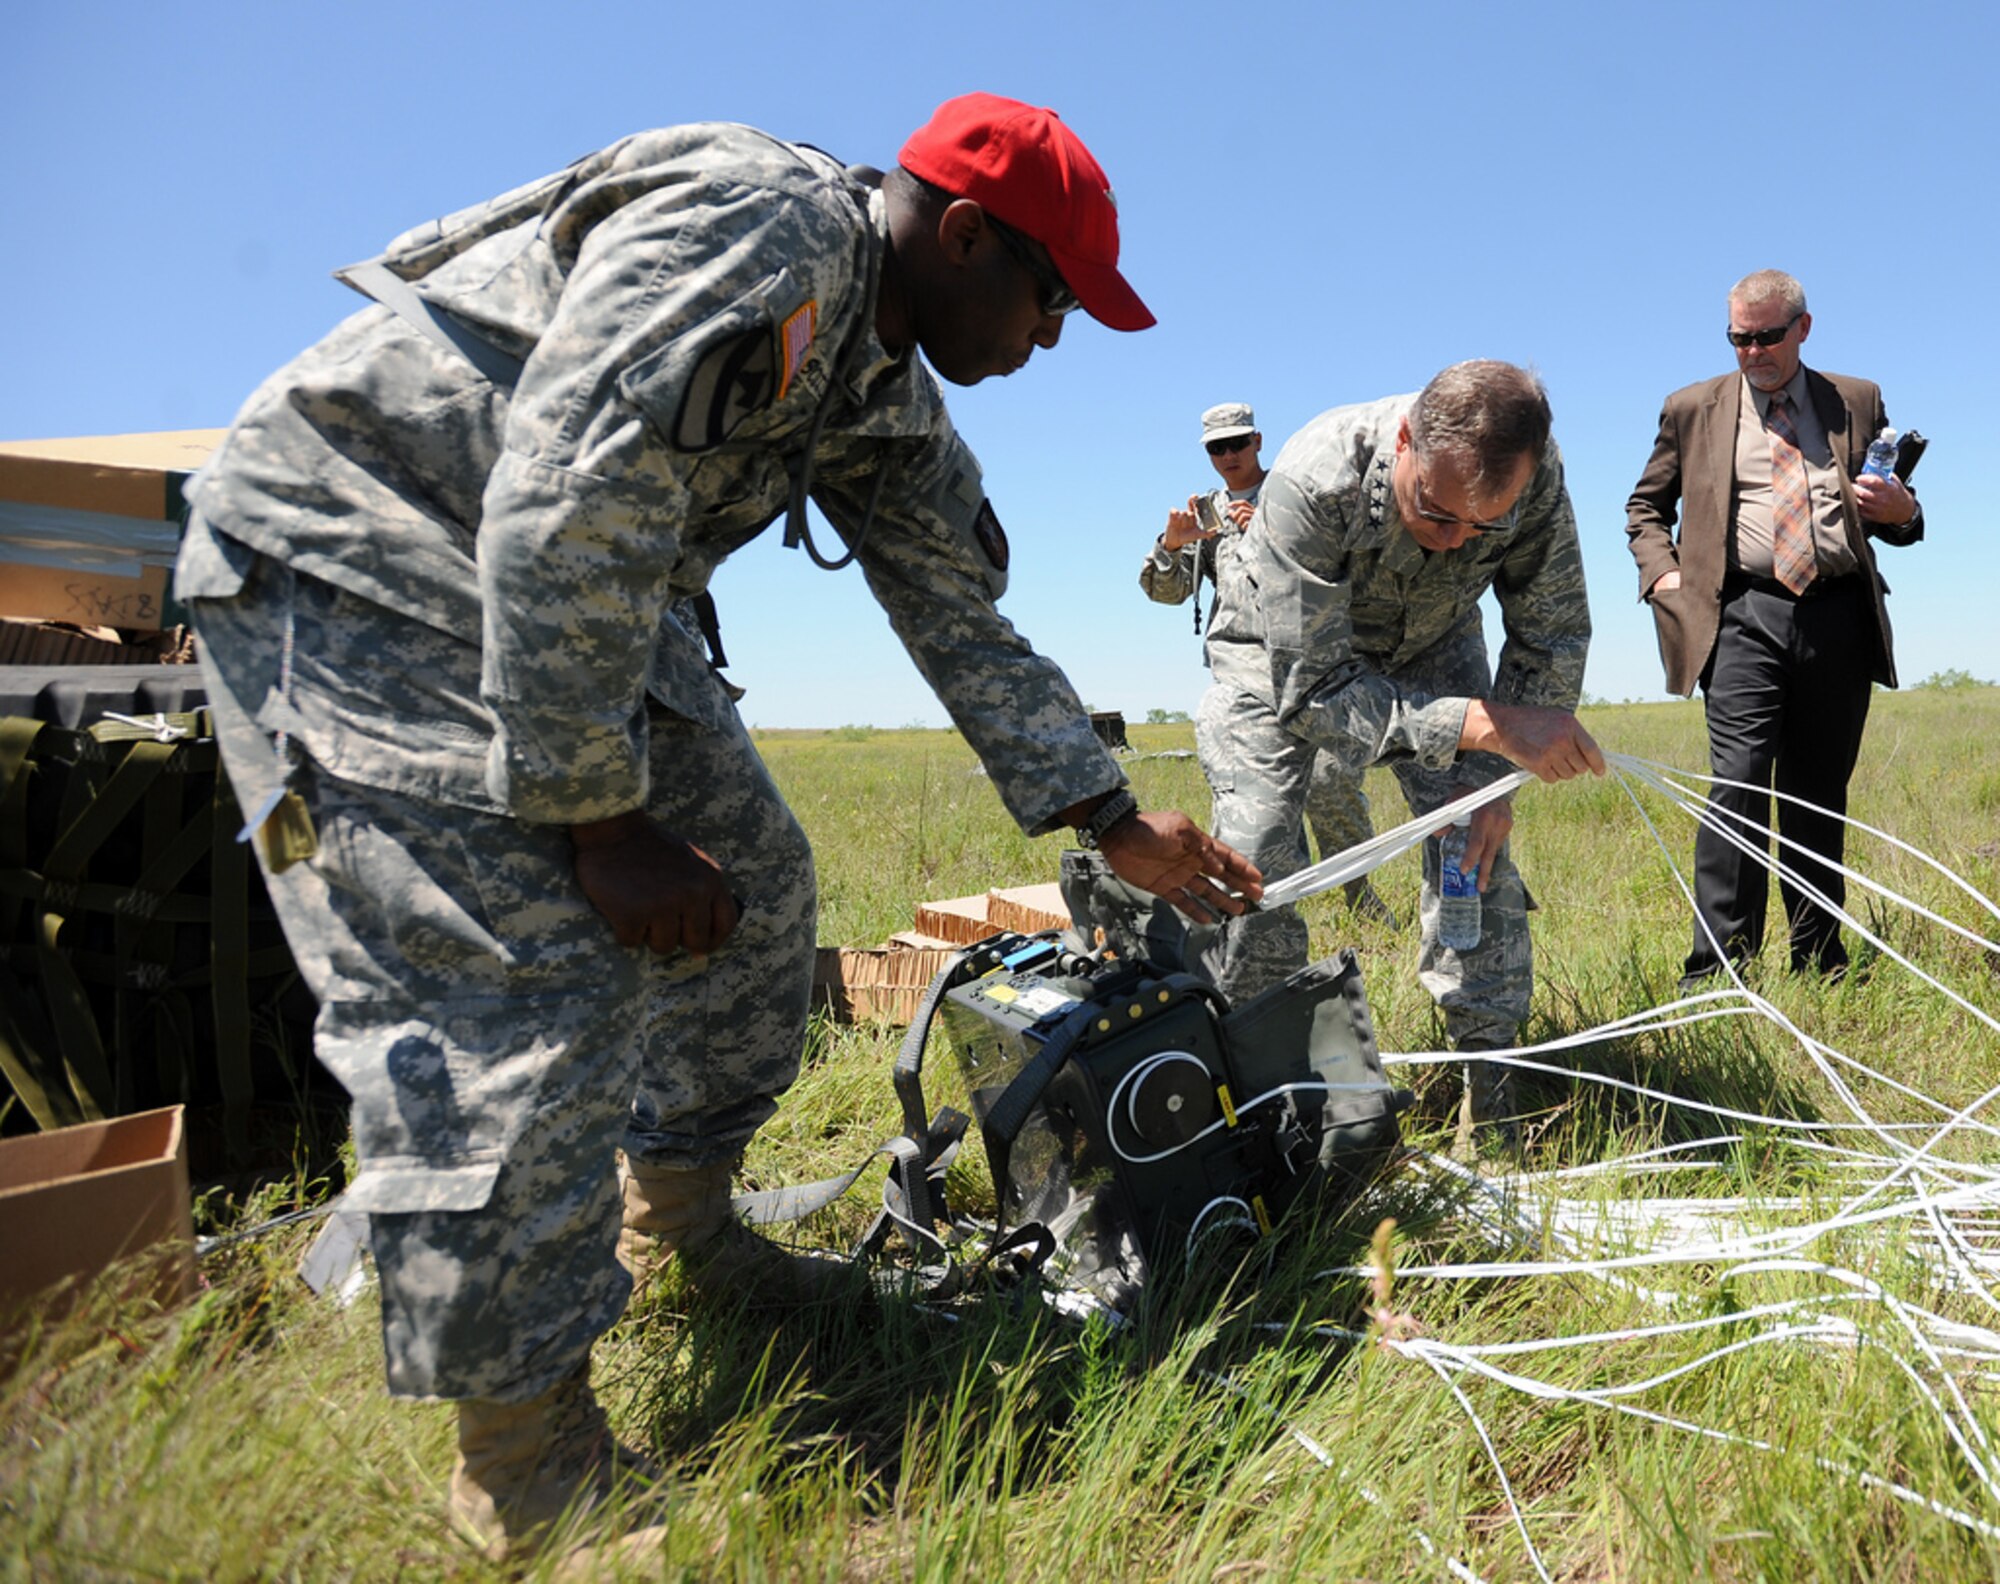 General William M. Fraser III, commander of U.S. Transportation Command, and Staff Sgt. Cabe Scotland, 294th Quartermaster Company, National Guard, inspect the JPADS's Automatic Guidance Unit, which ensures a precise drop location, during a training exercise Tuesday, April 24, at the Antelope Drop Zone at Fort Hood. The joint exercise was conducted by the Air Force's 317th Airlift Group, responsible for flying the C-130s, and the National Guard's 294th Quartermaster Company, responsible for packing, rigging and loading the bundles onto the aircraft. (Photo by Daniel Cernero, III Corps and Fort Hood Public Affairs)